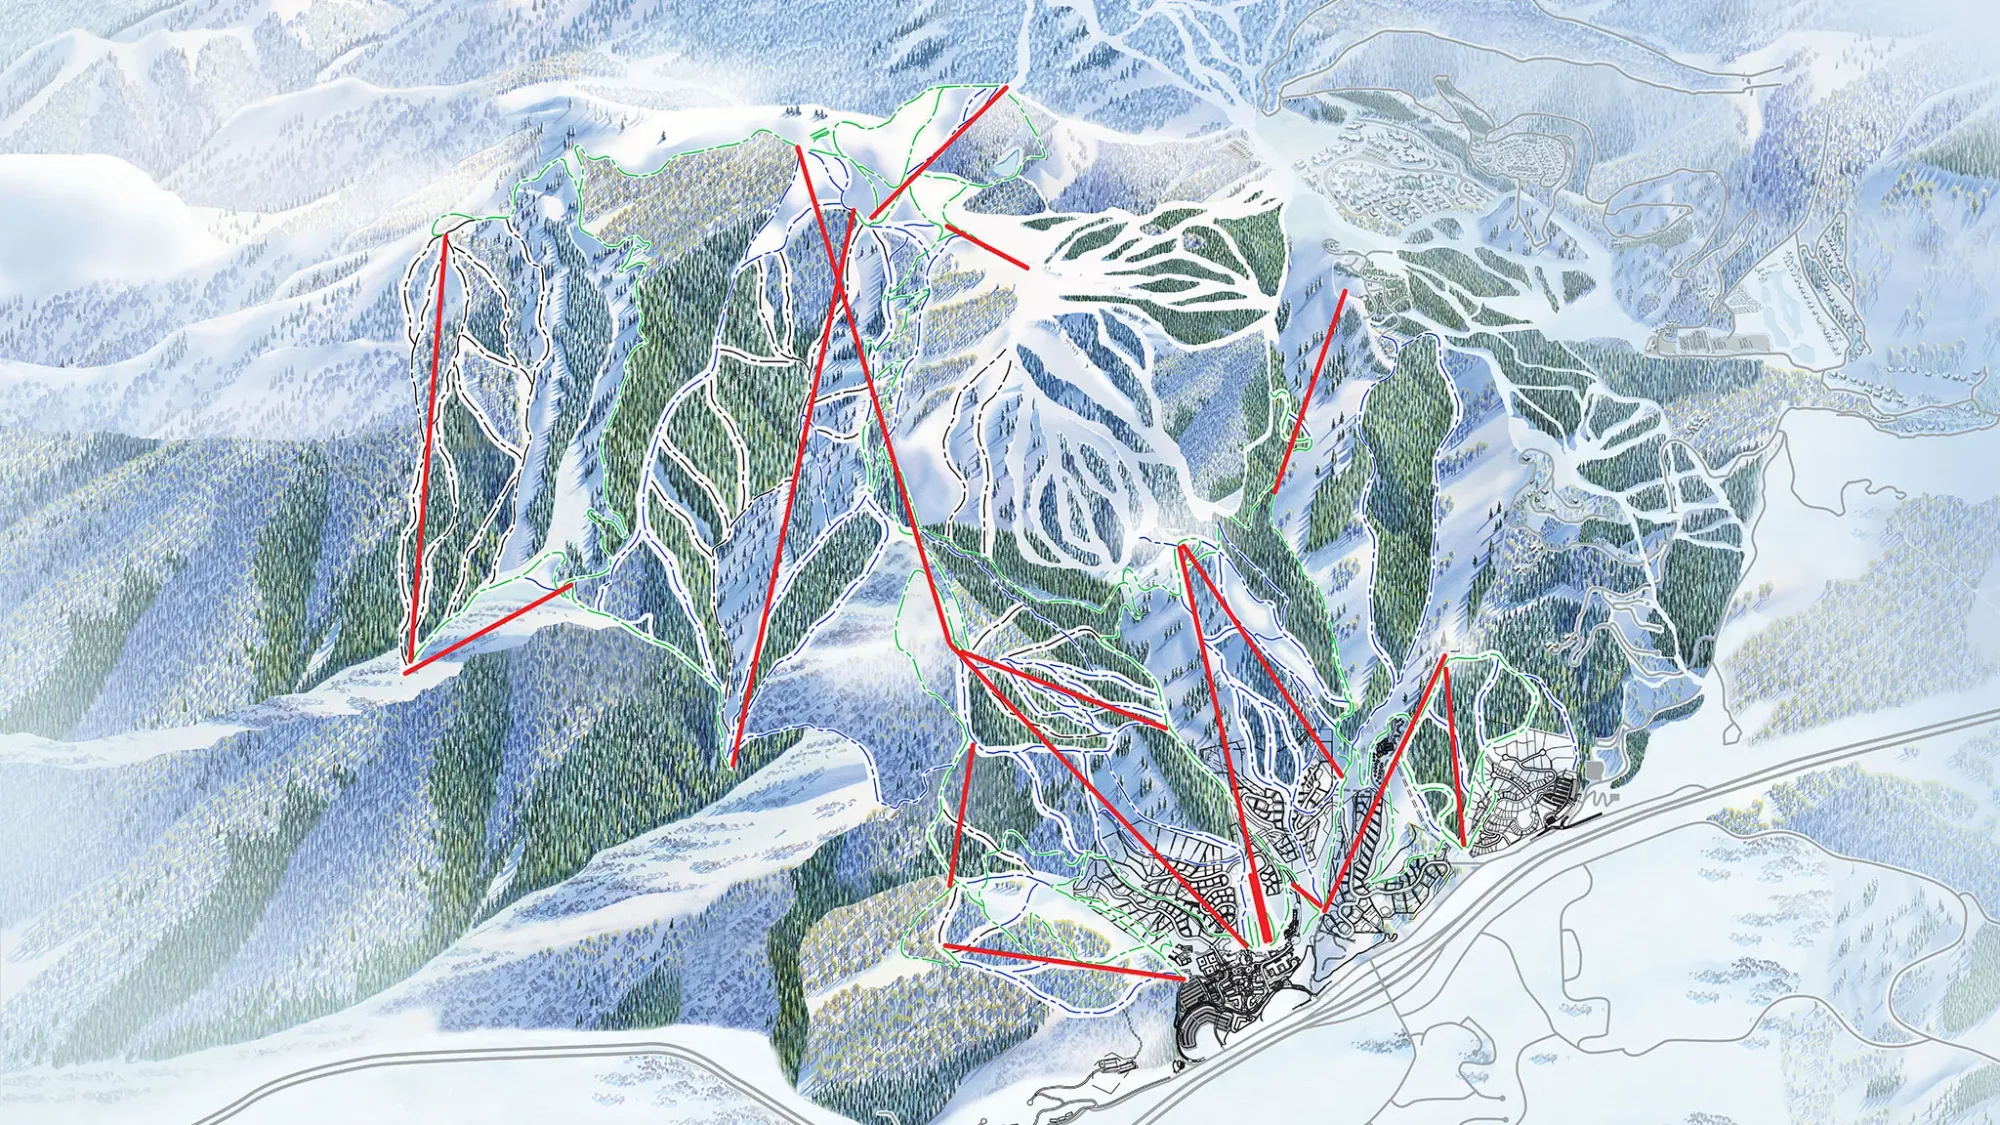 The Deer Valley expansion will result in 5,726 acres of total terrain, the majority of which will debut in the 2025/2026 ski season.